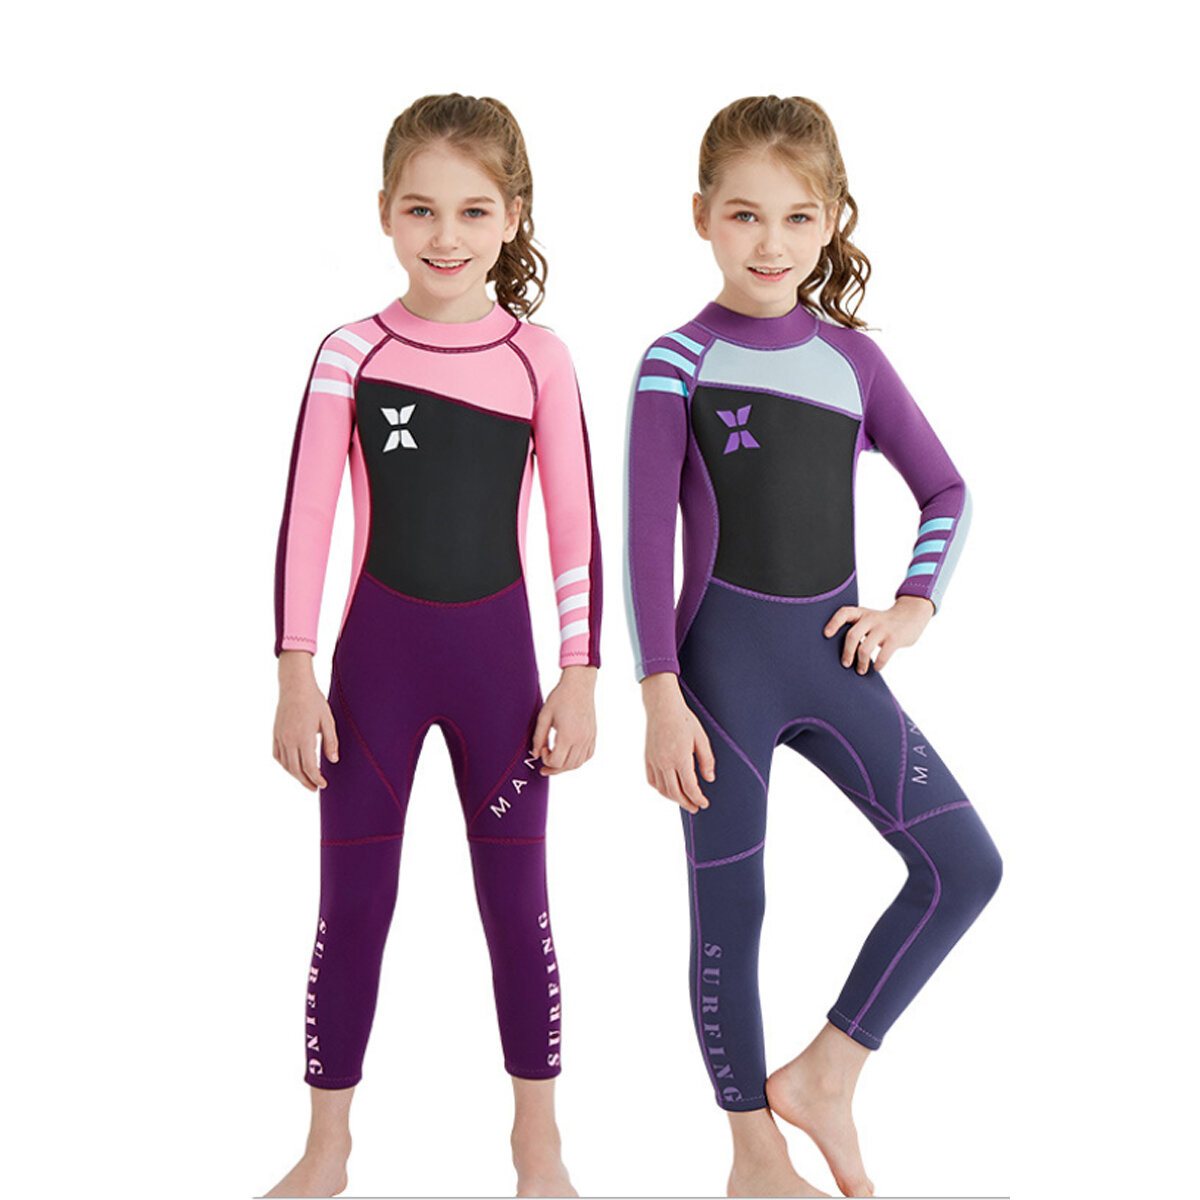 

Kids Diving Suit 2.5MM Neoprene Wetsuit Children For Boys Girls Keep Warm One-piece Long Sleeves UV Protection Swimwear